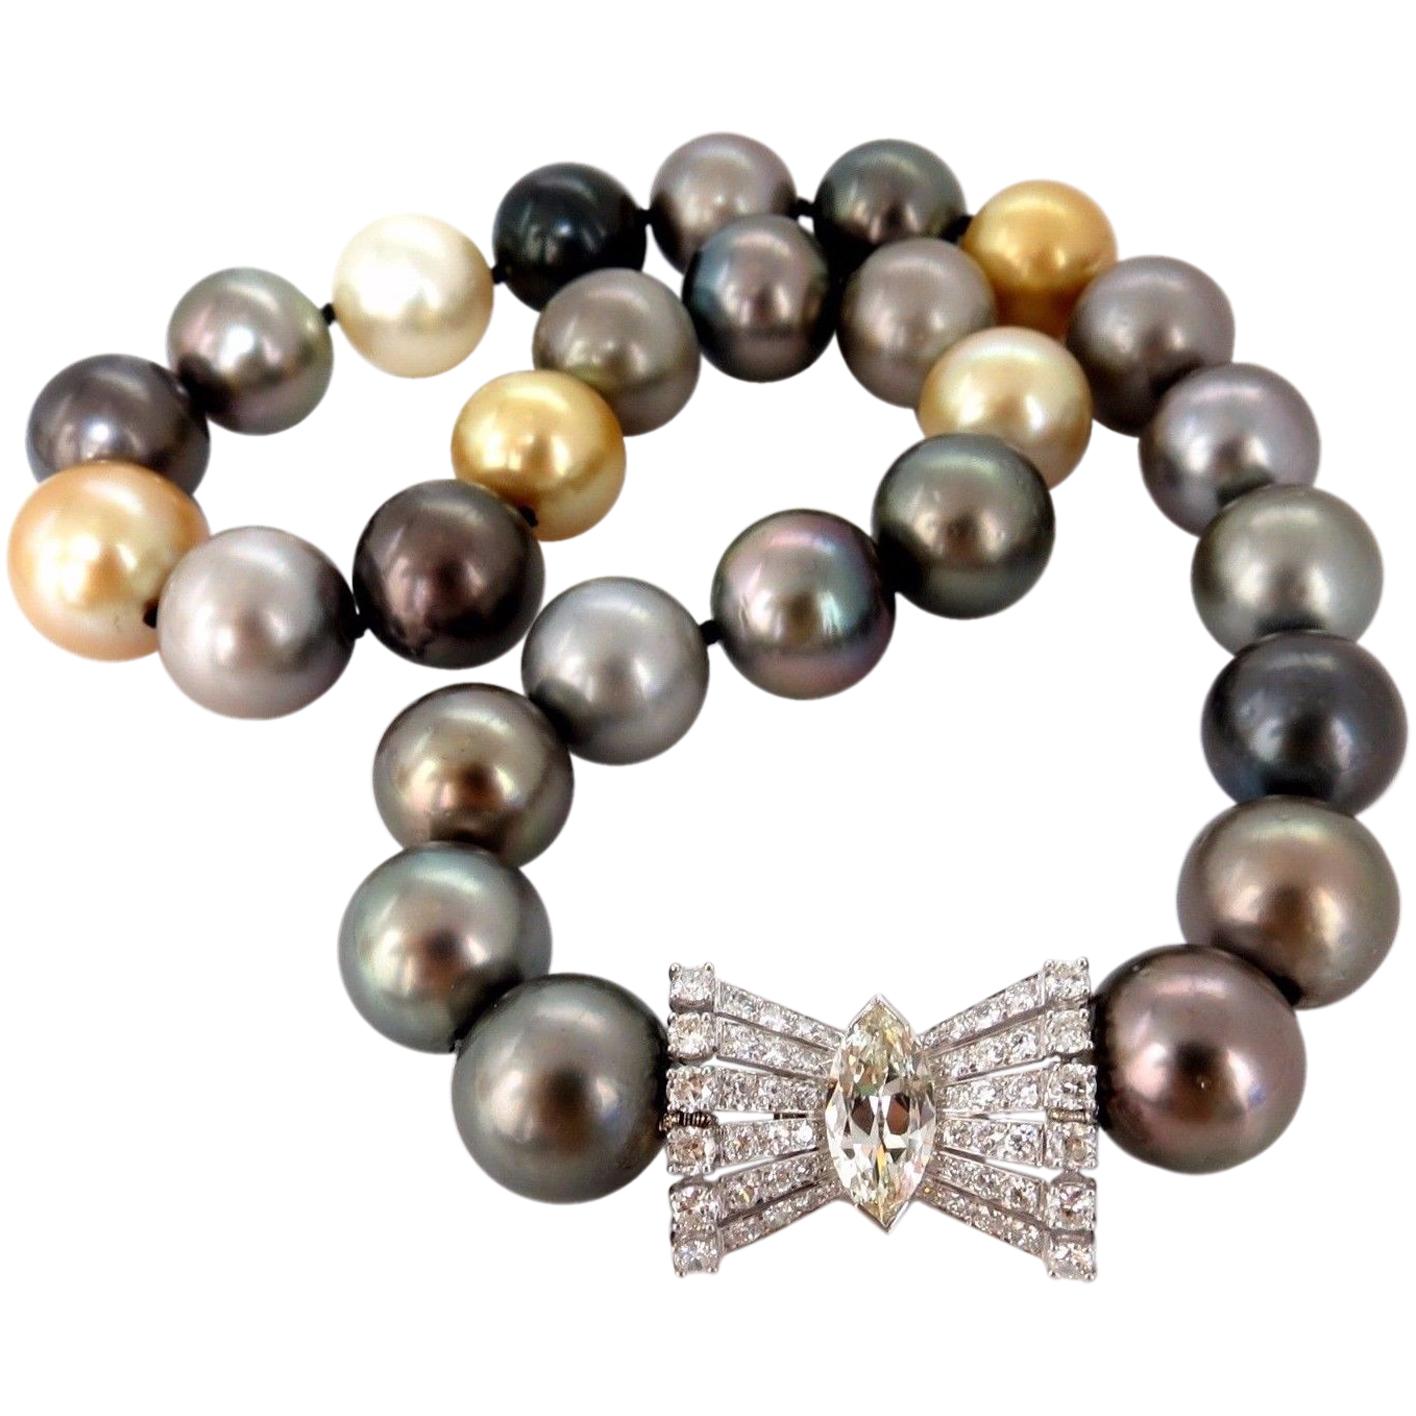 GIA certified Natural Tahitian Pearl Necklace 4.00ct. diamonds 18Kt Magnificent For Sale